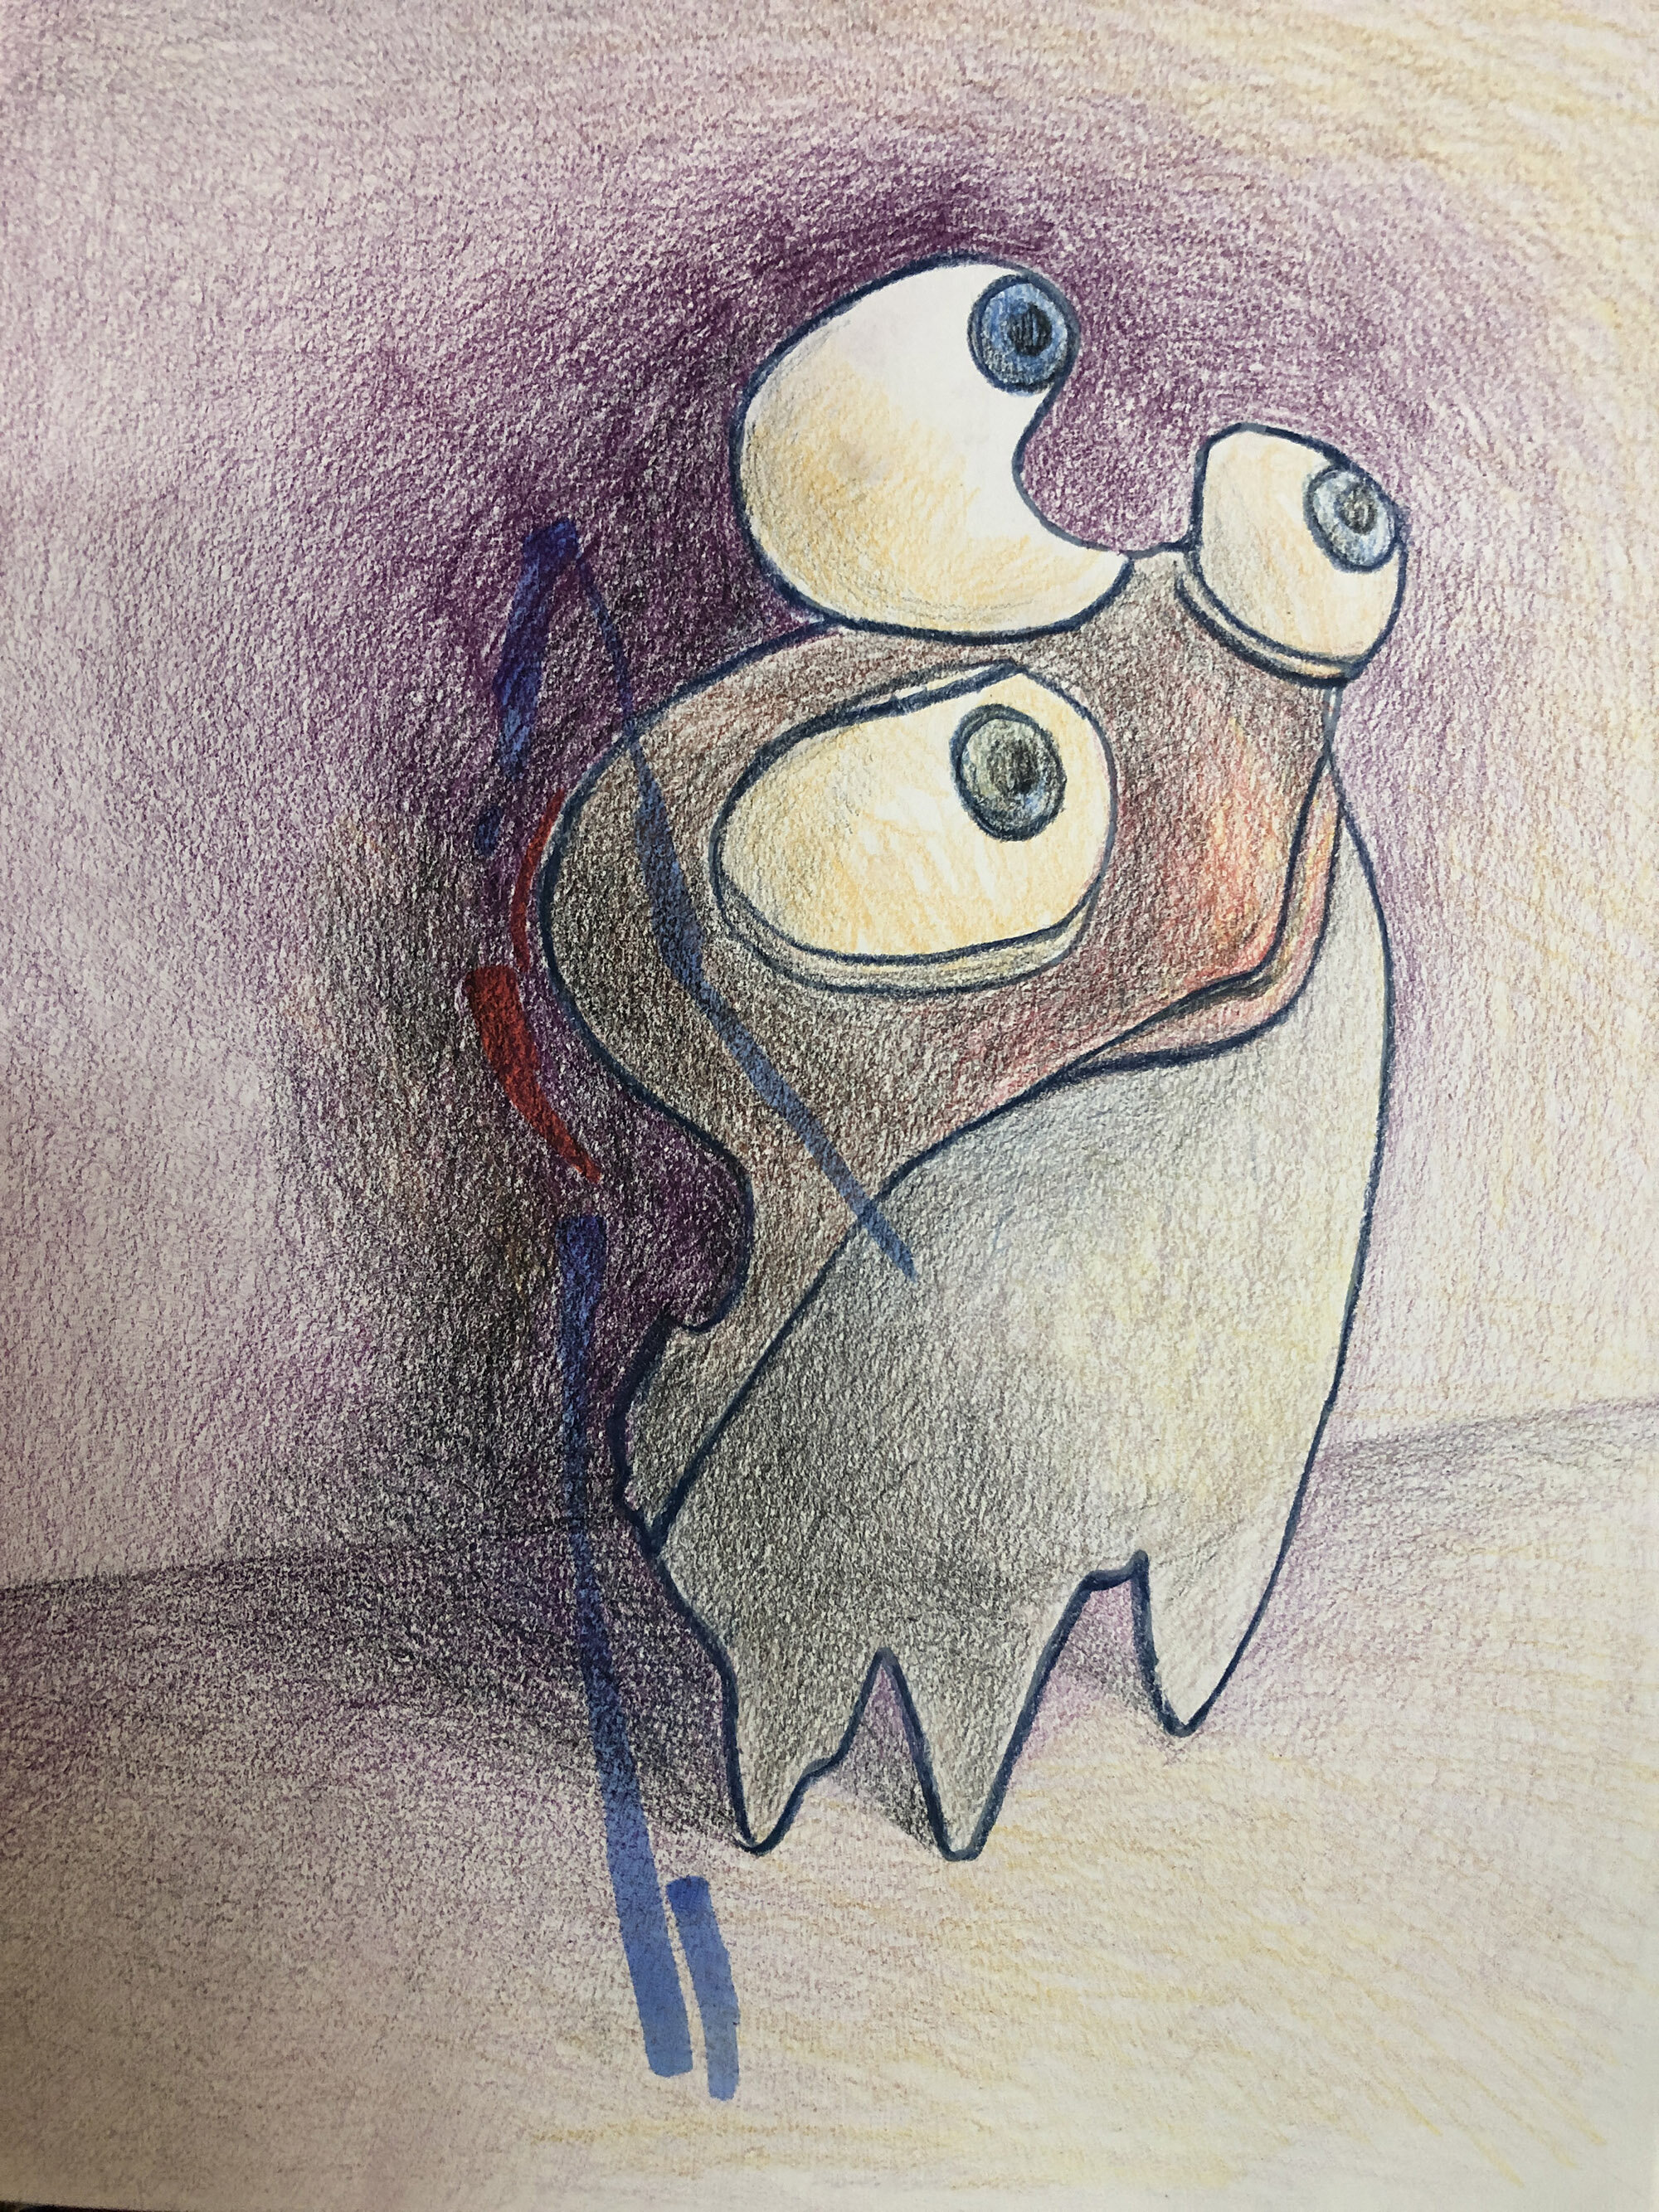 SOLD Weird Bird Thingy  9" x12" Colored Pencil on Paper